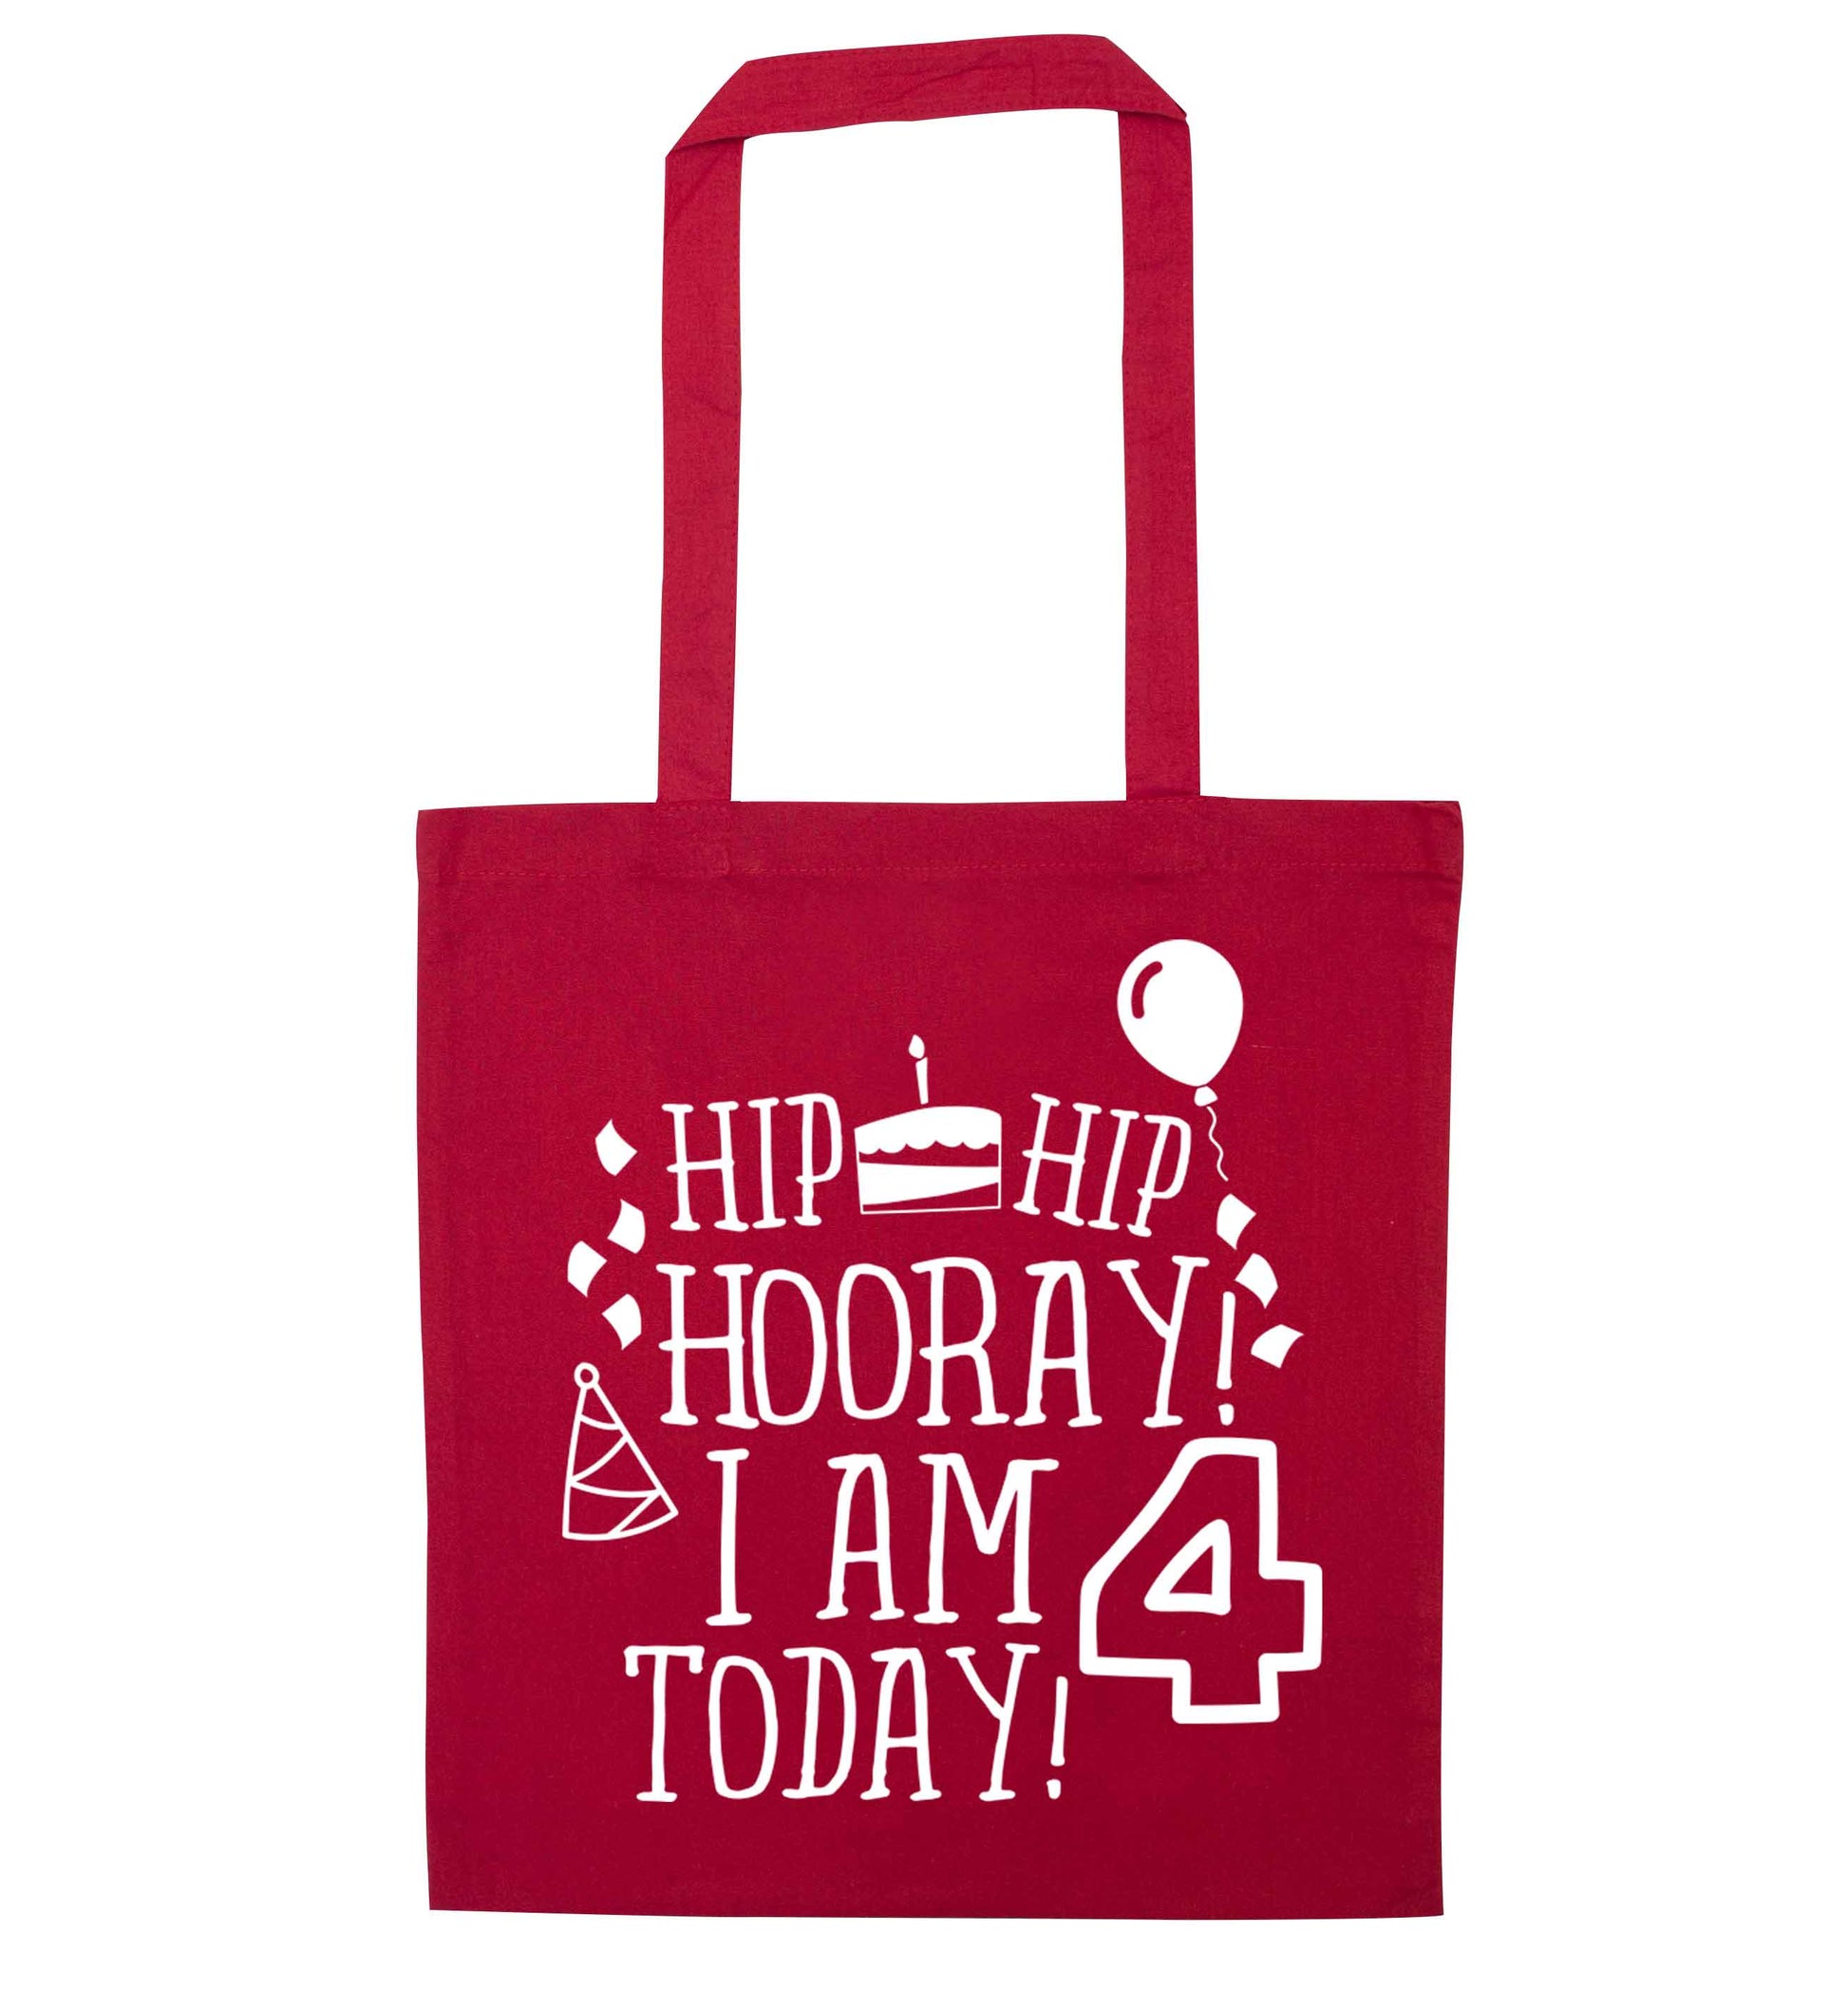 Hip hip hooray I am four today! red tote bag